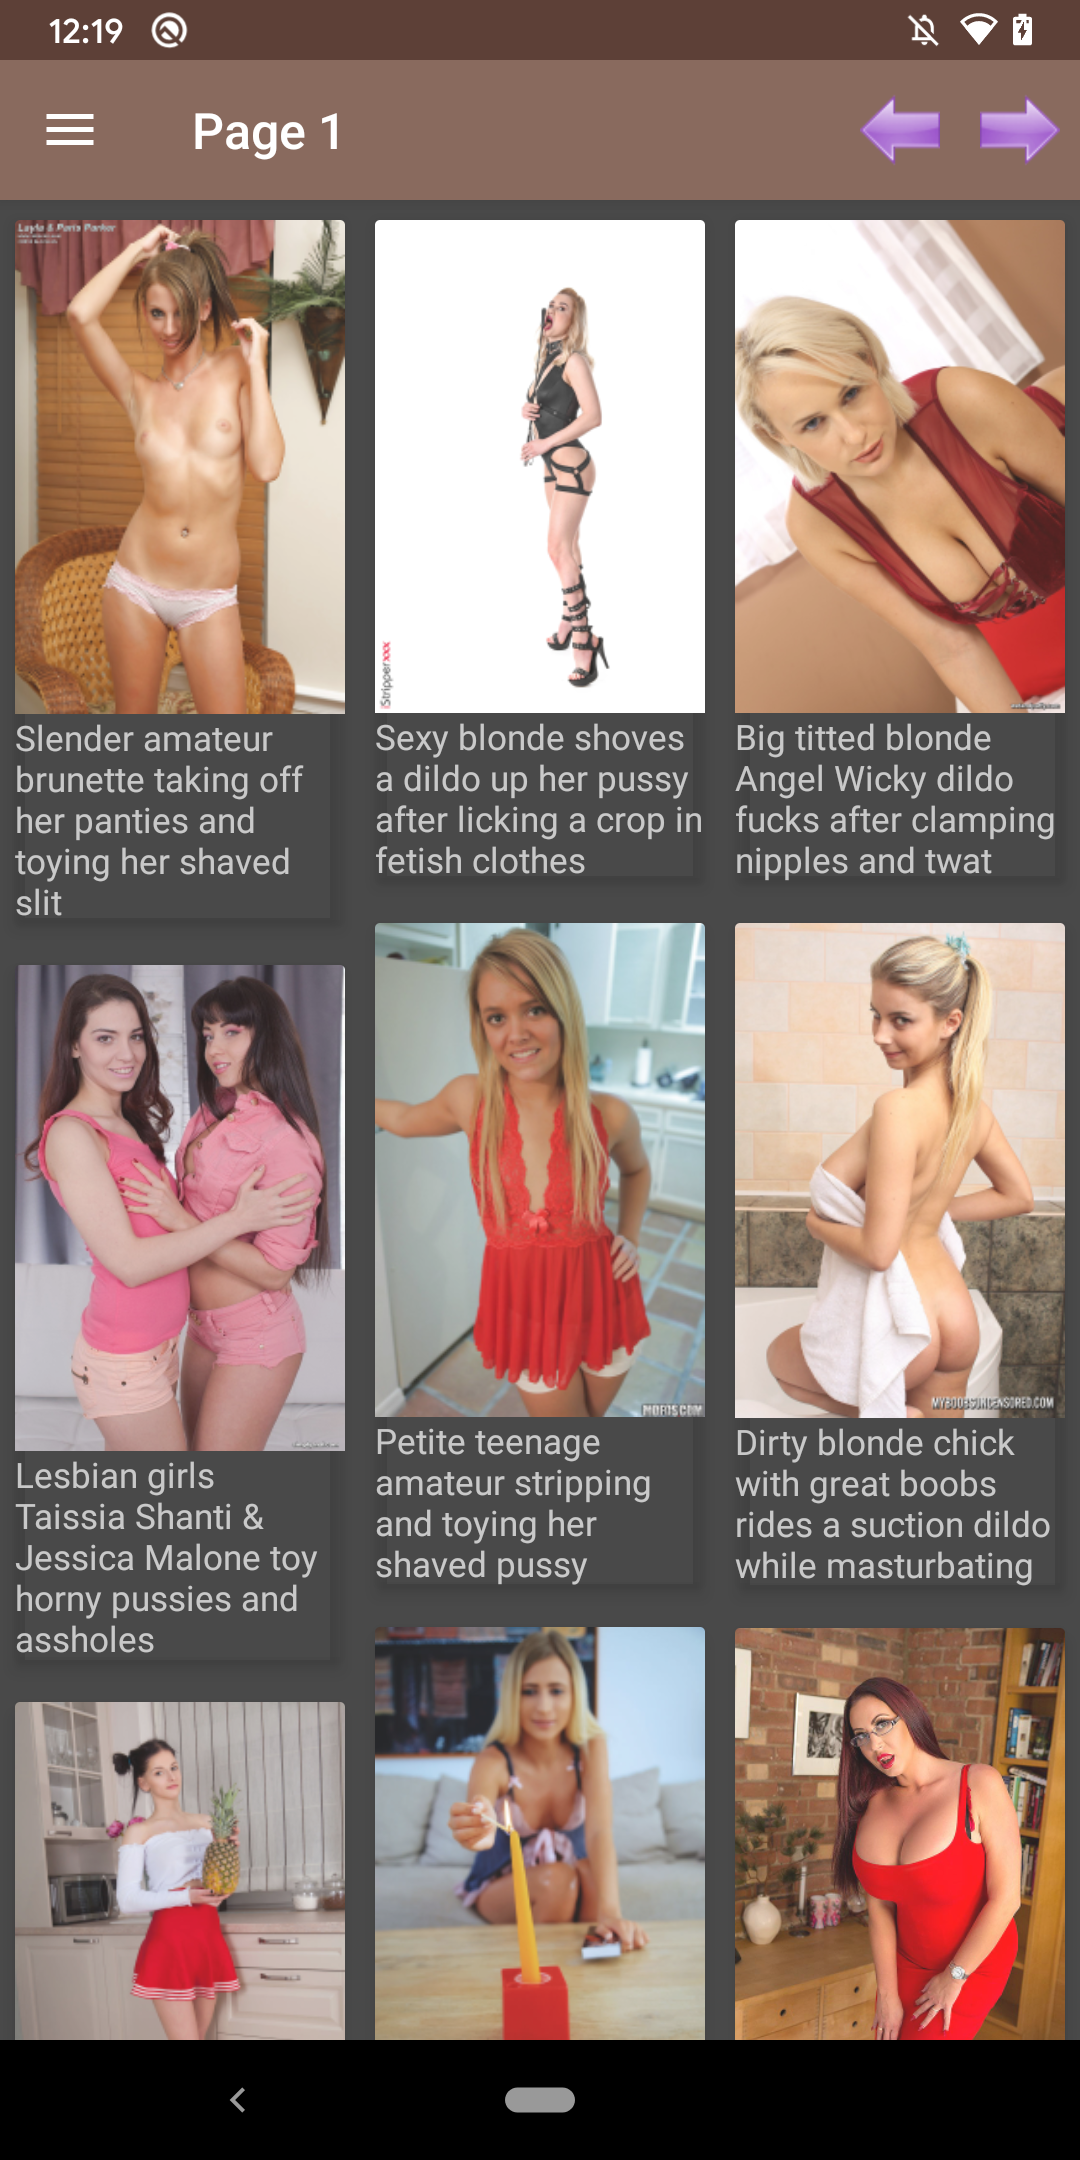 Dildo Galleries pic,porn,maker,and,viewer,tsubakigaoka,pics,mod,wallpapers,danchi,panties,app,sexy,hot,amateurs,apps,puzzles,galleries,titties,pictures,dildo,images,pornstars,apk,henati,kanrinin,collections,android,hentai,daily,photos